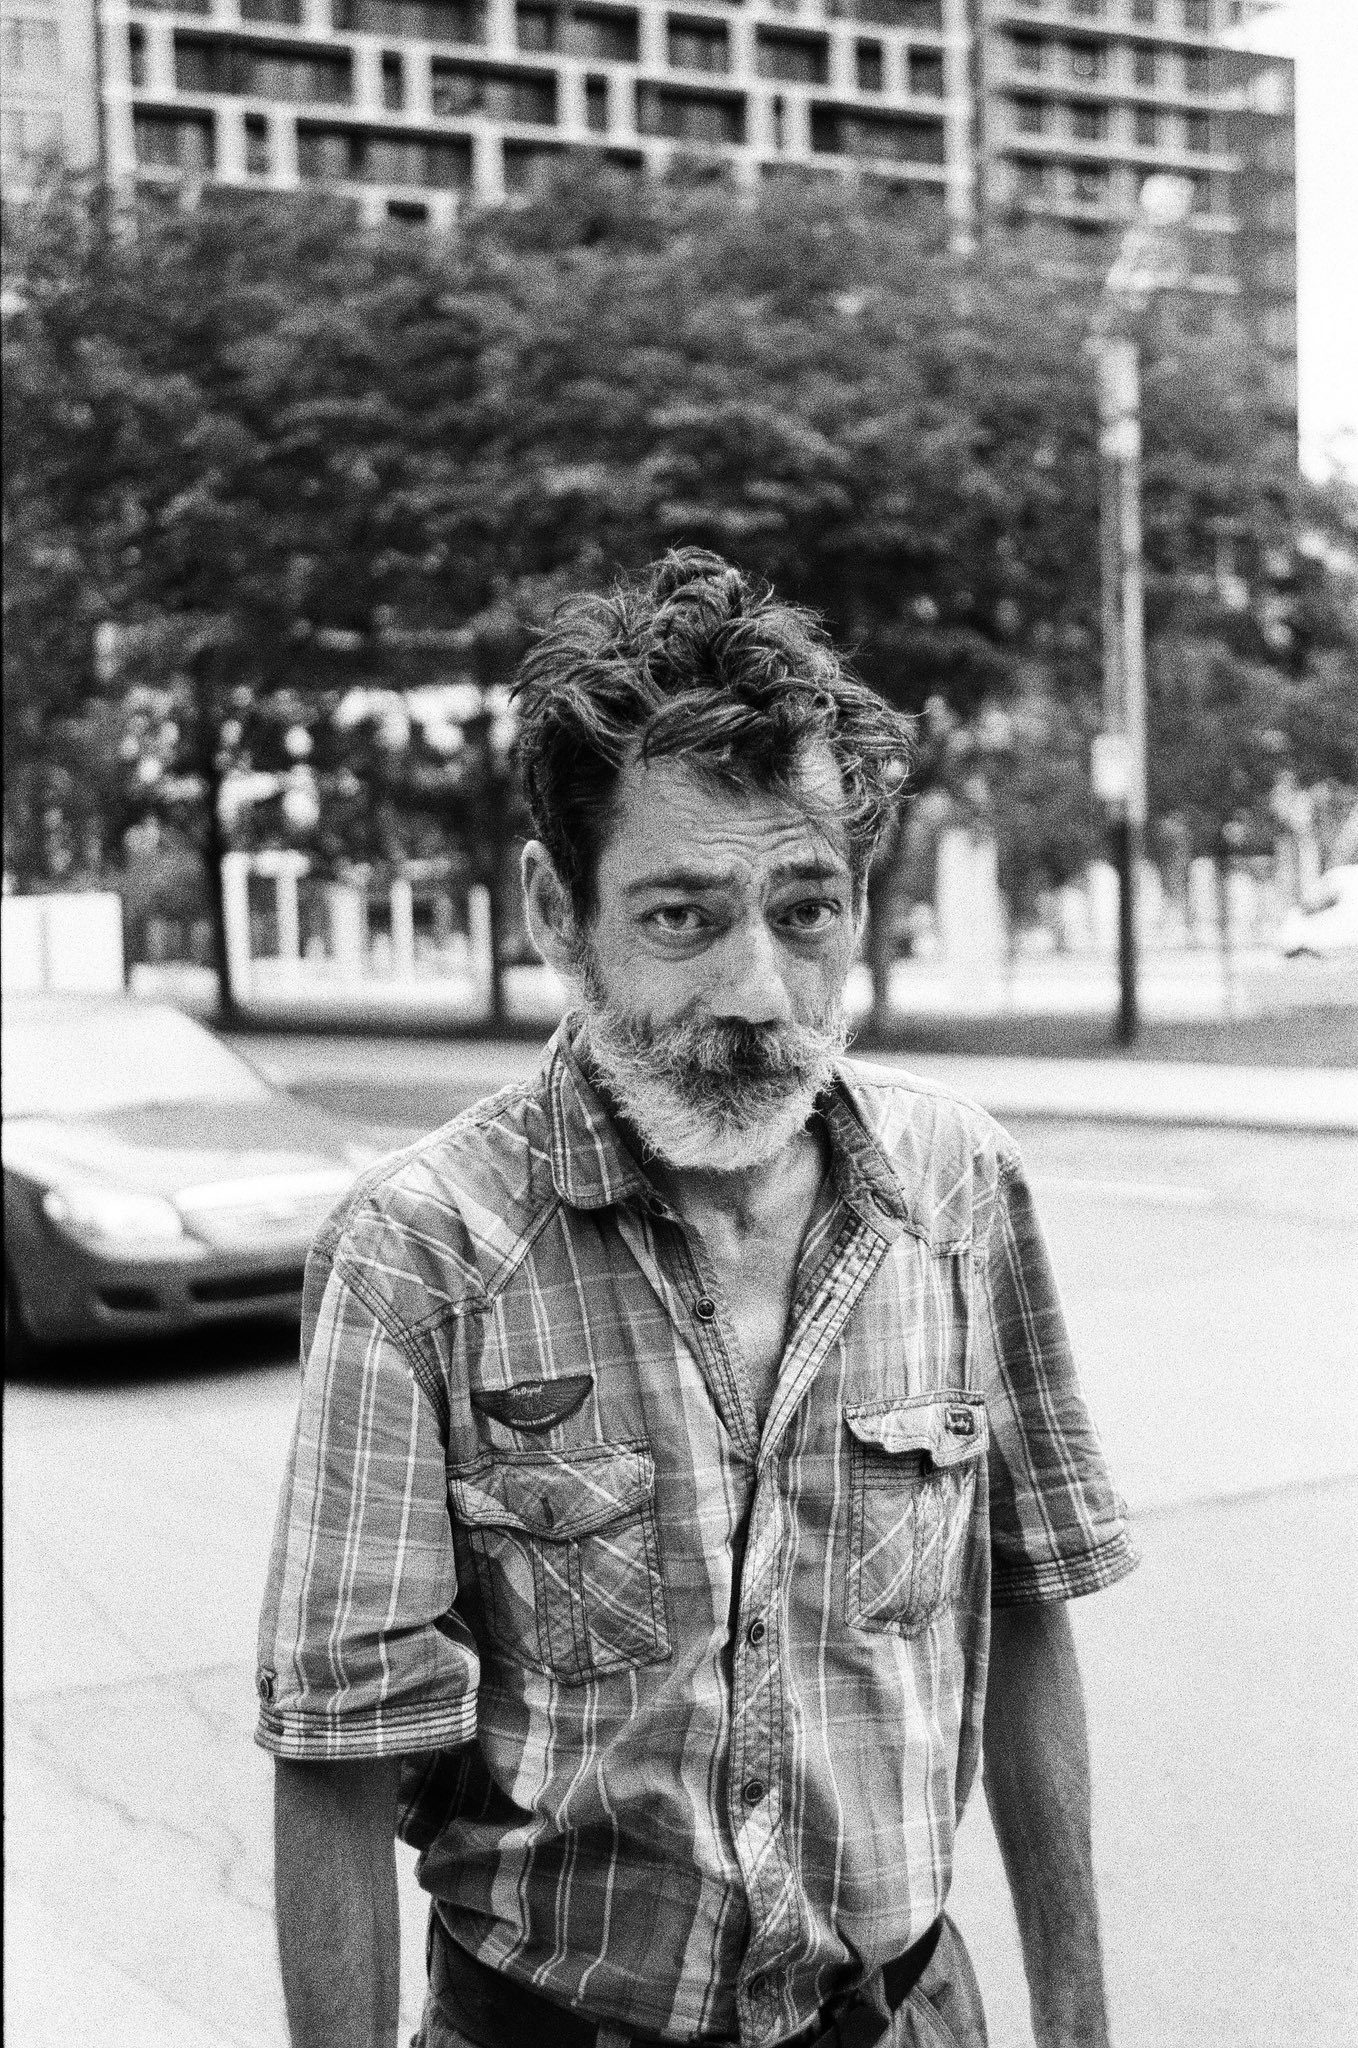 Black and white portrait of a man in the street